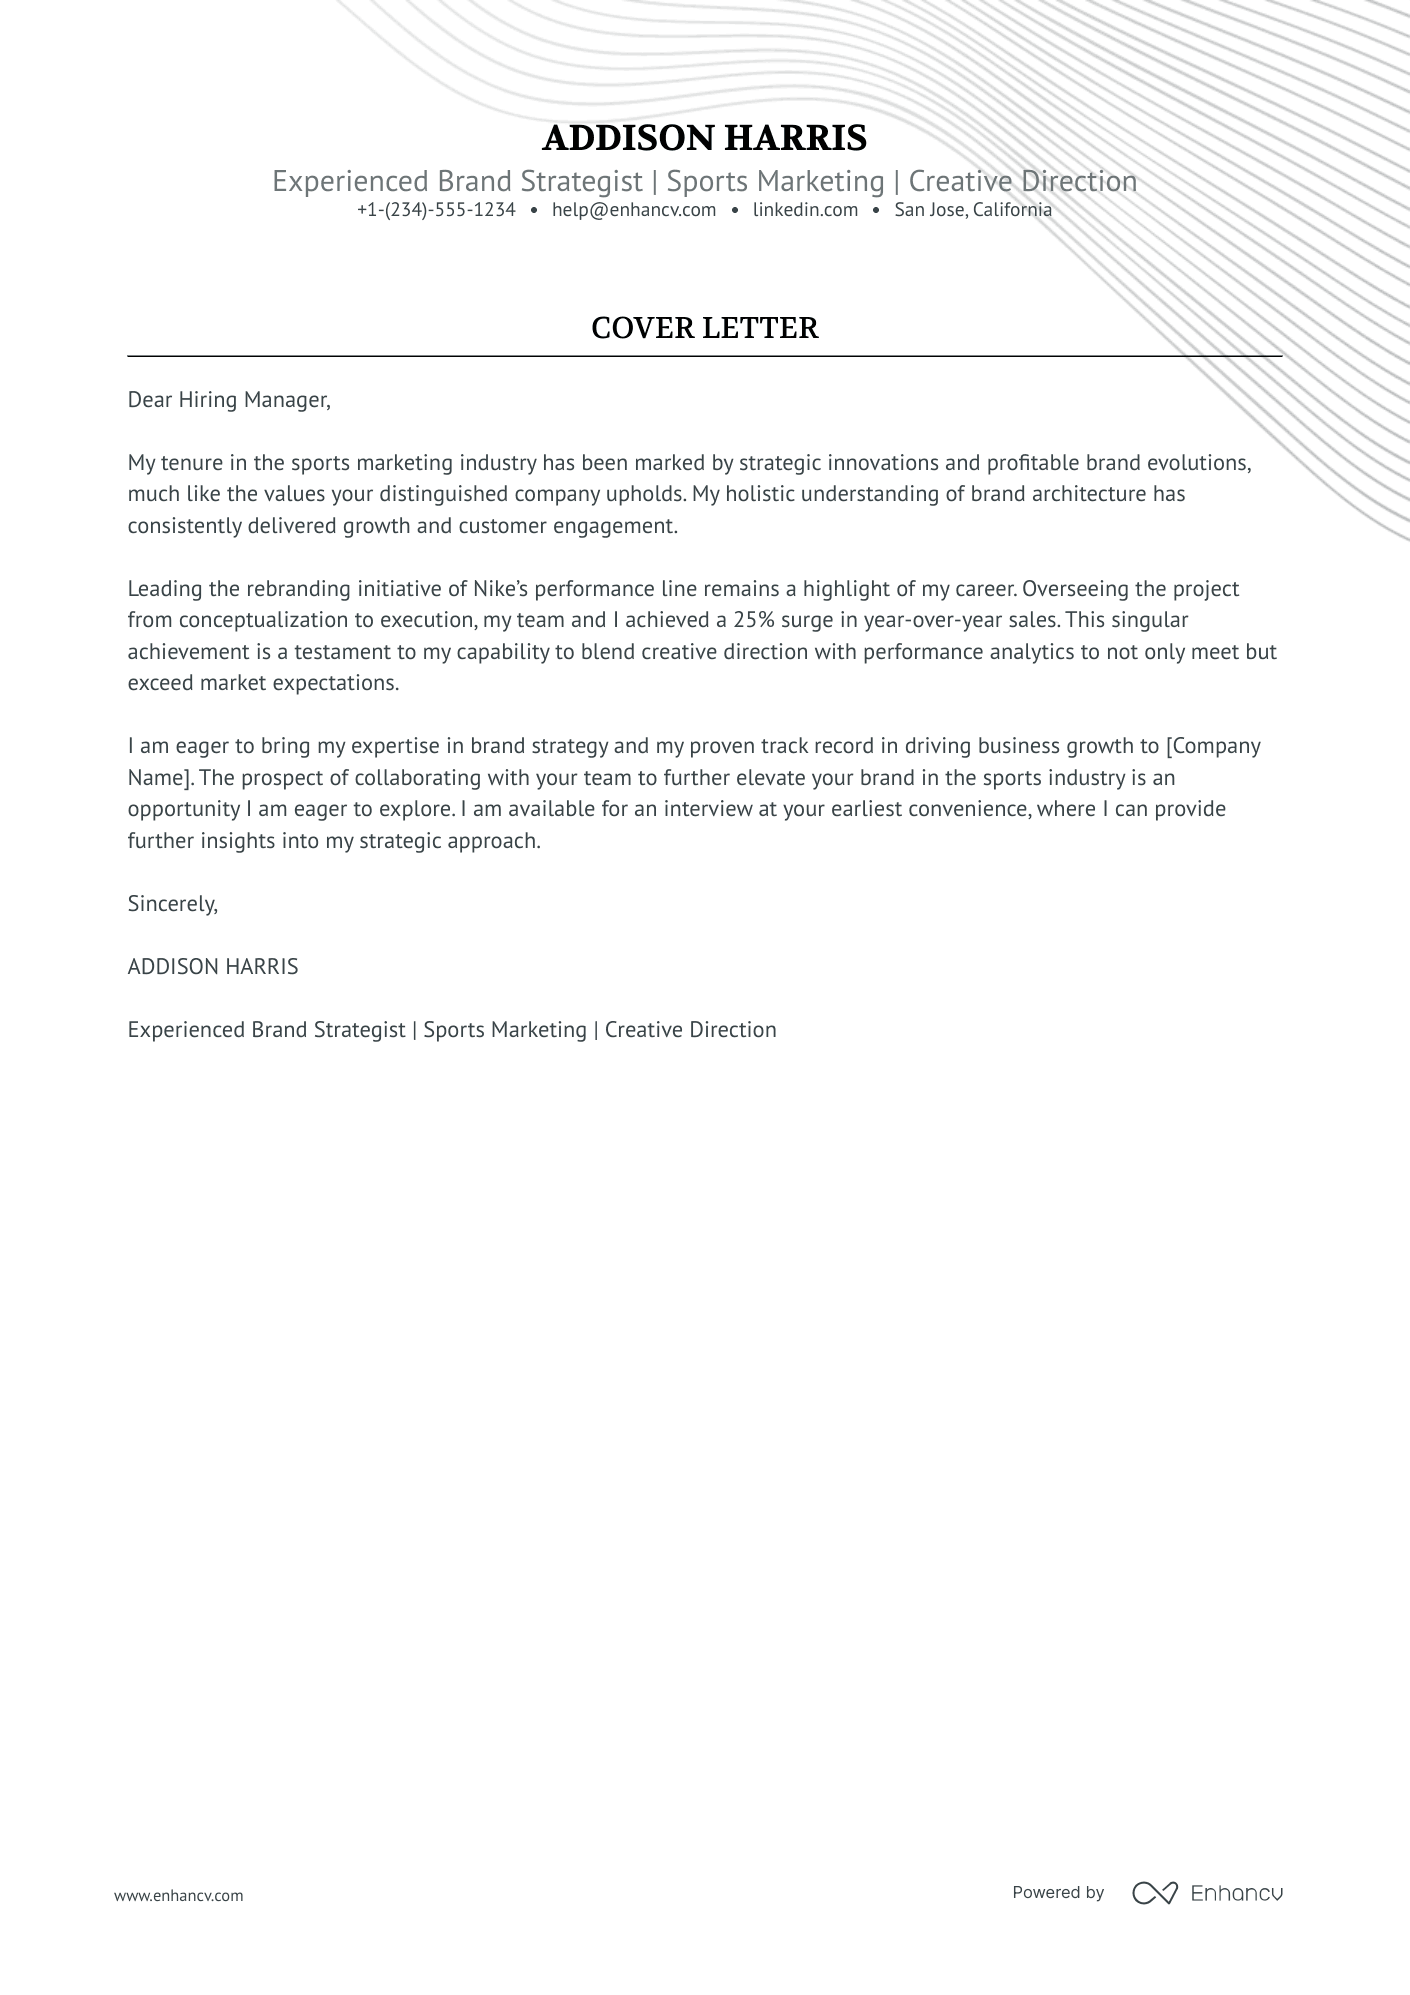 Brand Director cover letter